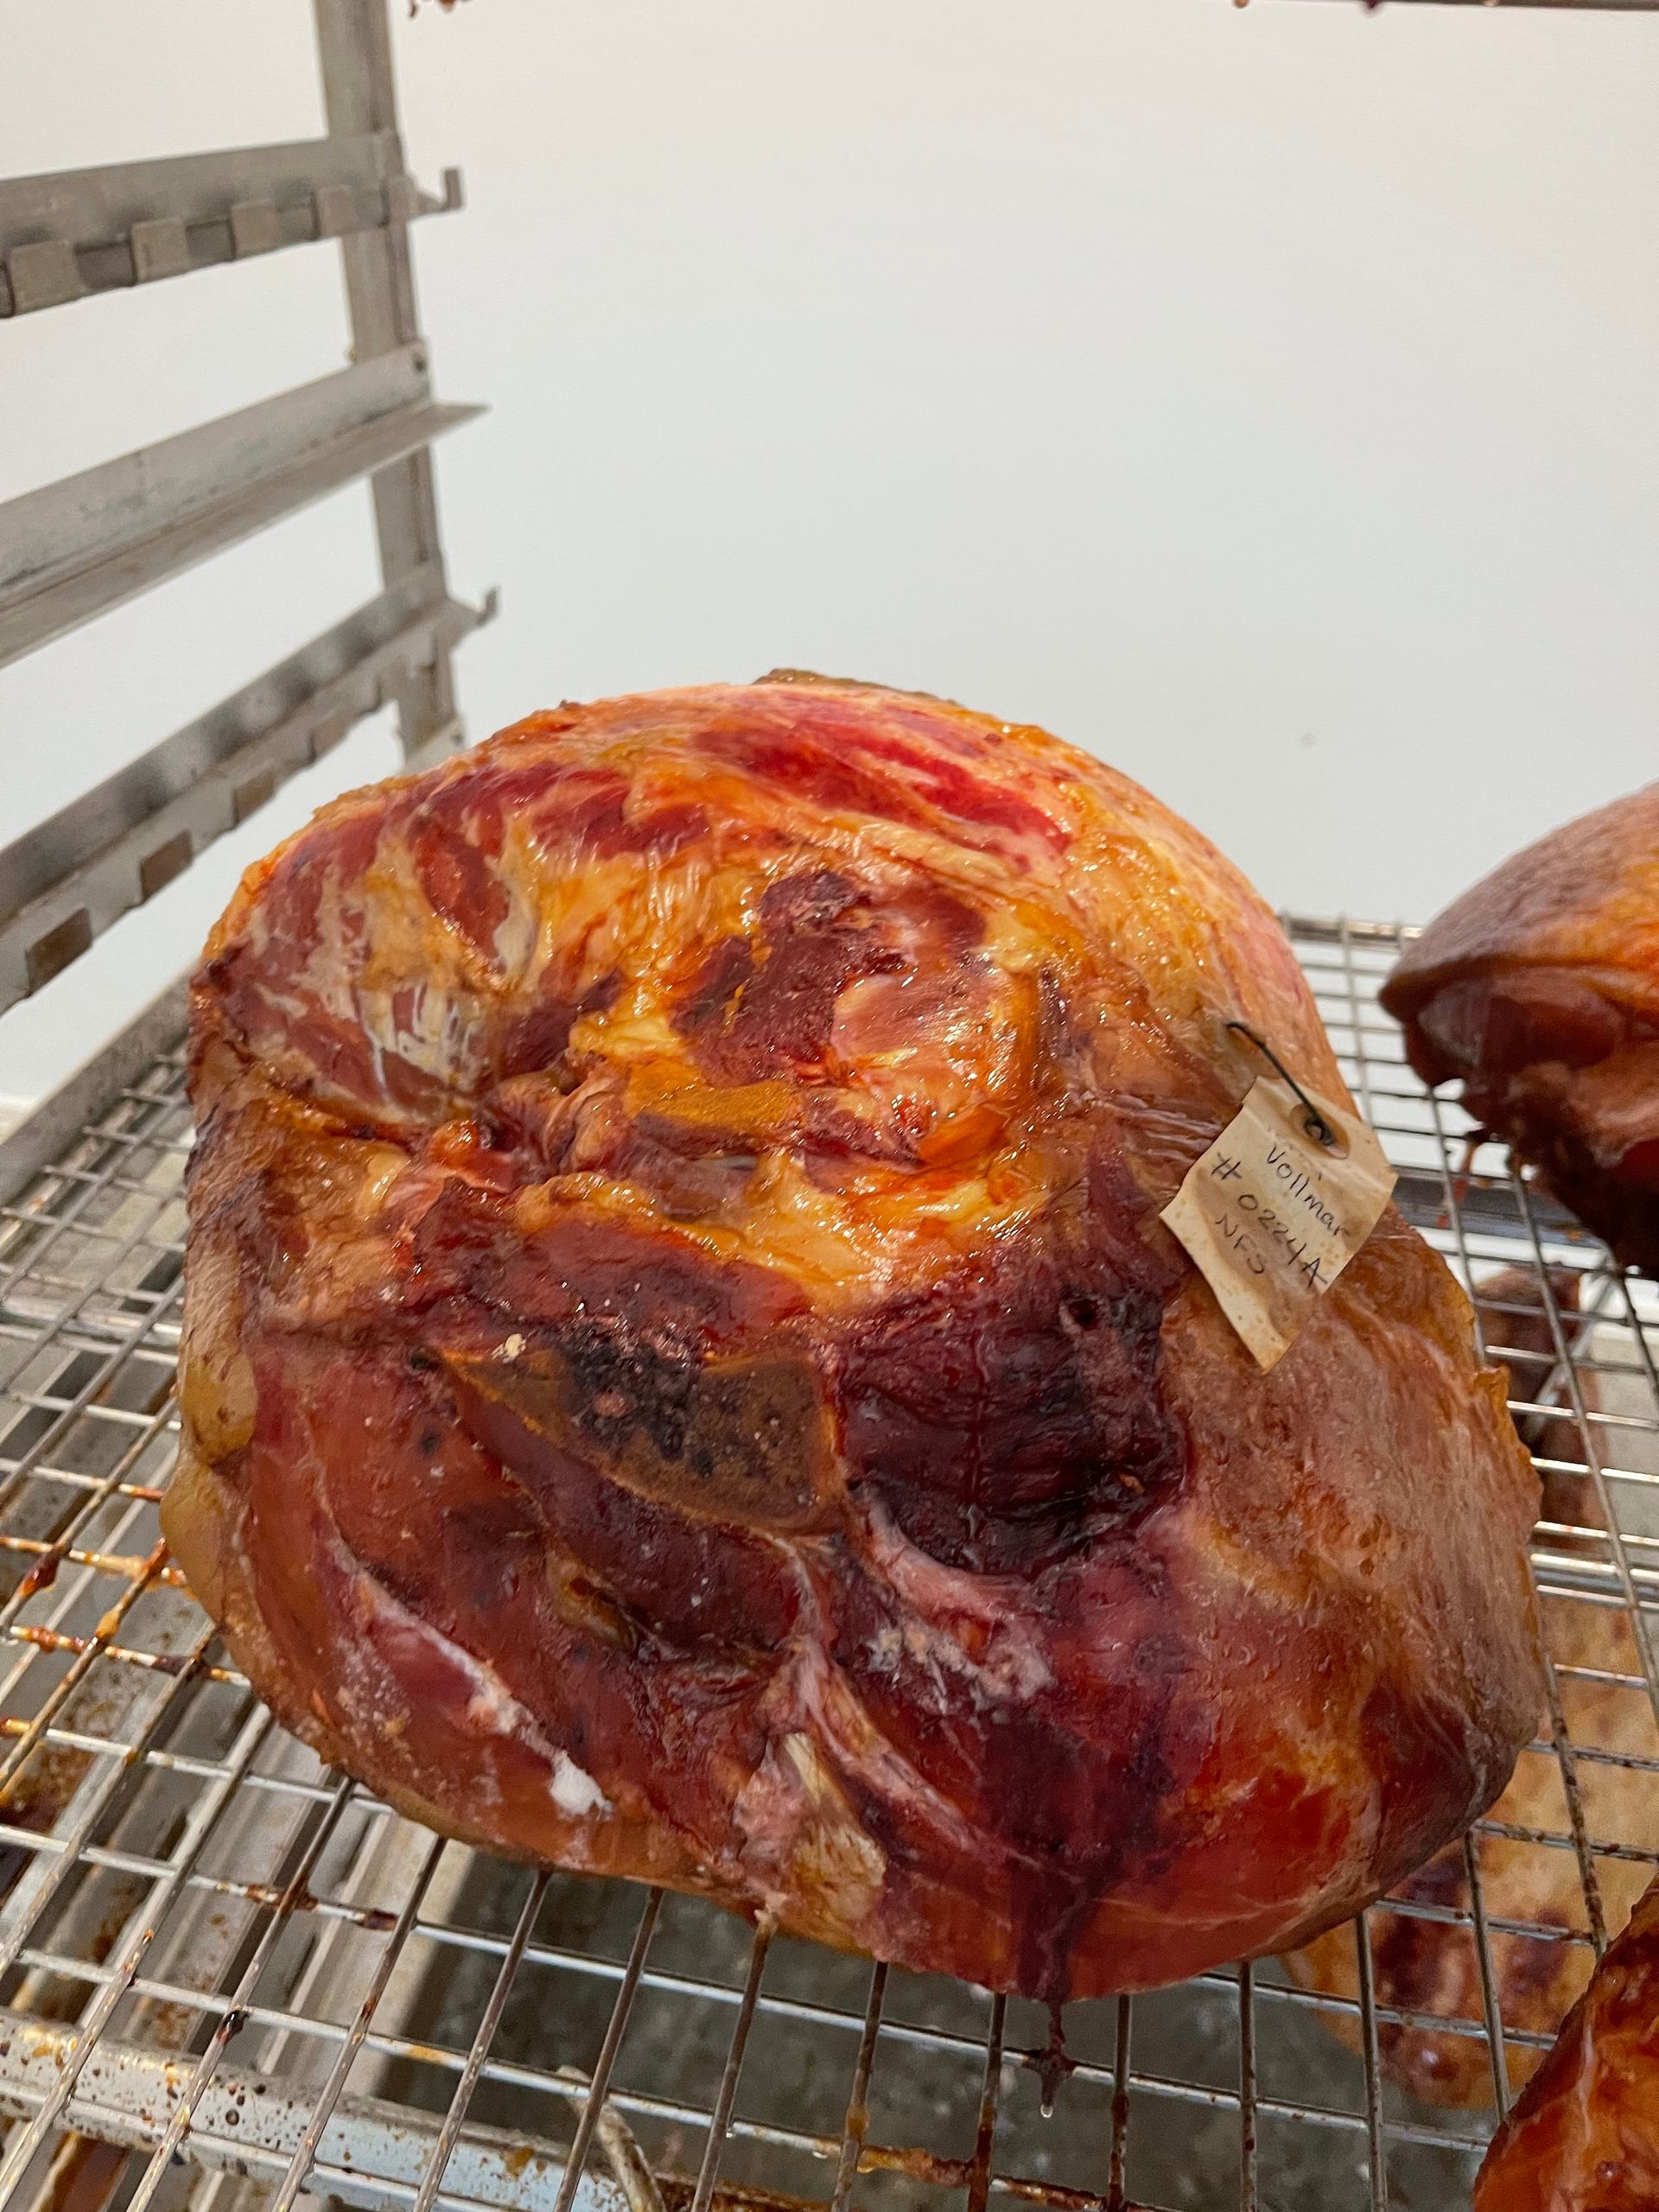 A large piece of meat is sitting on a wire rack.